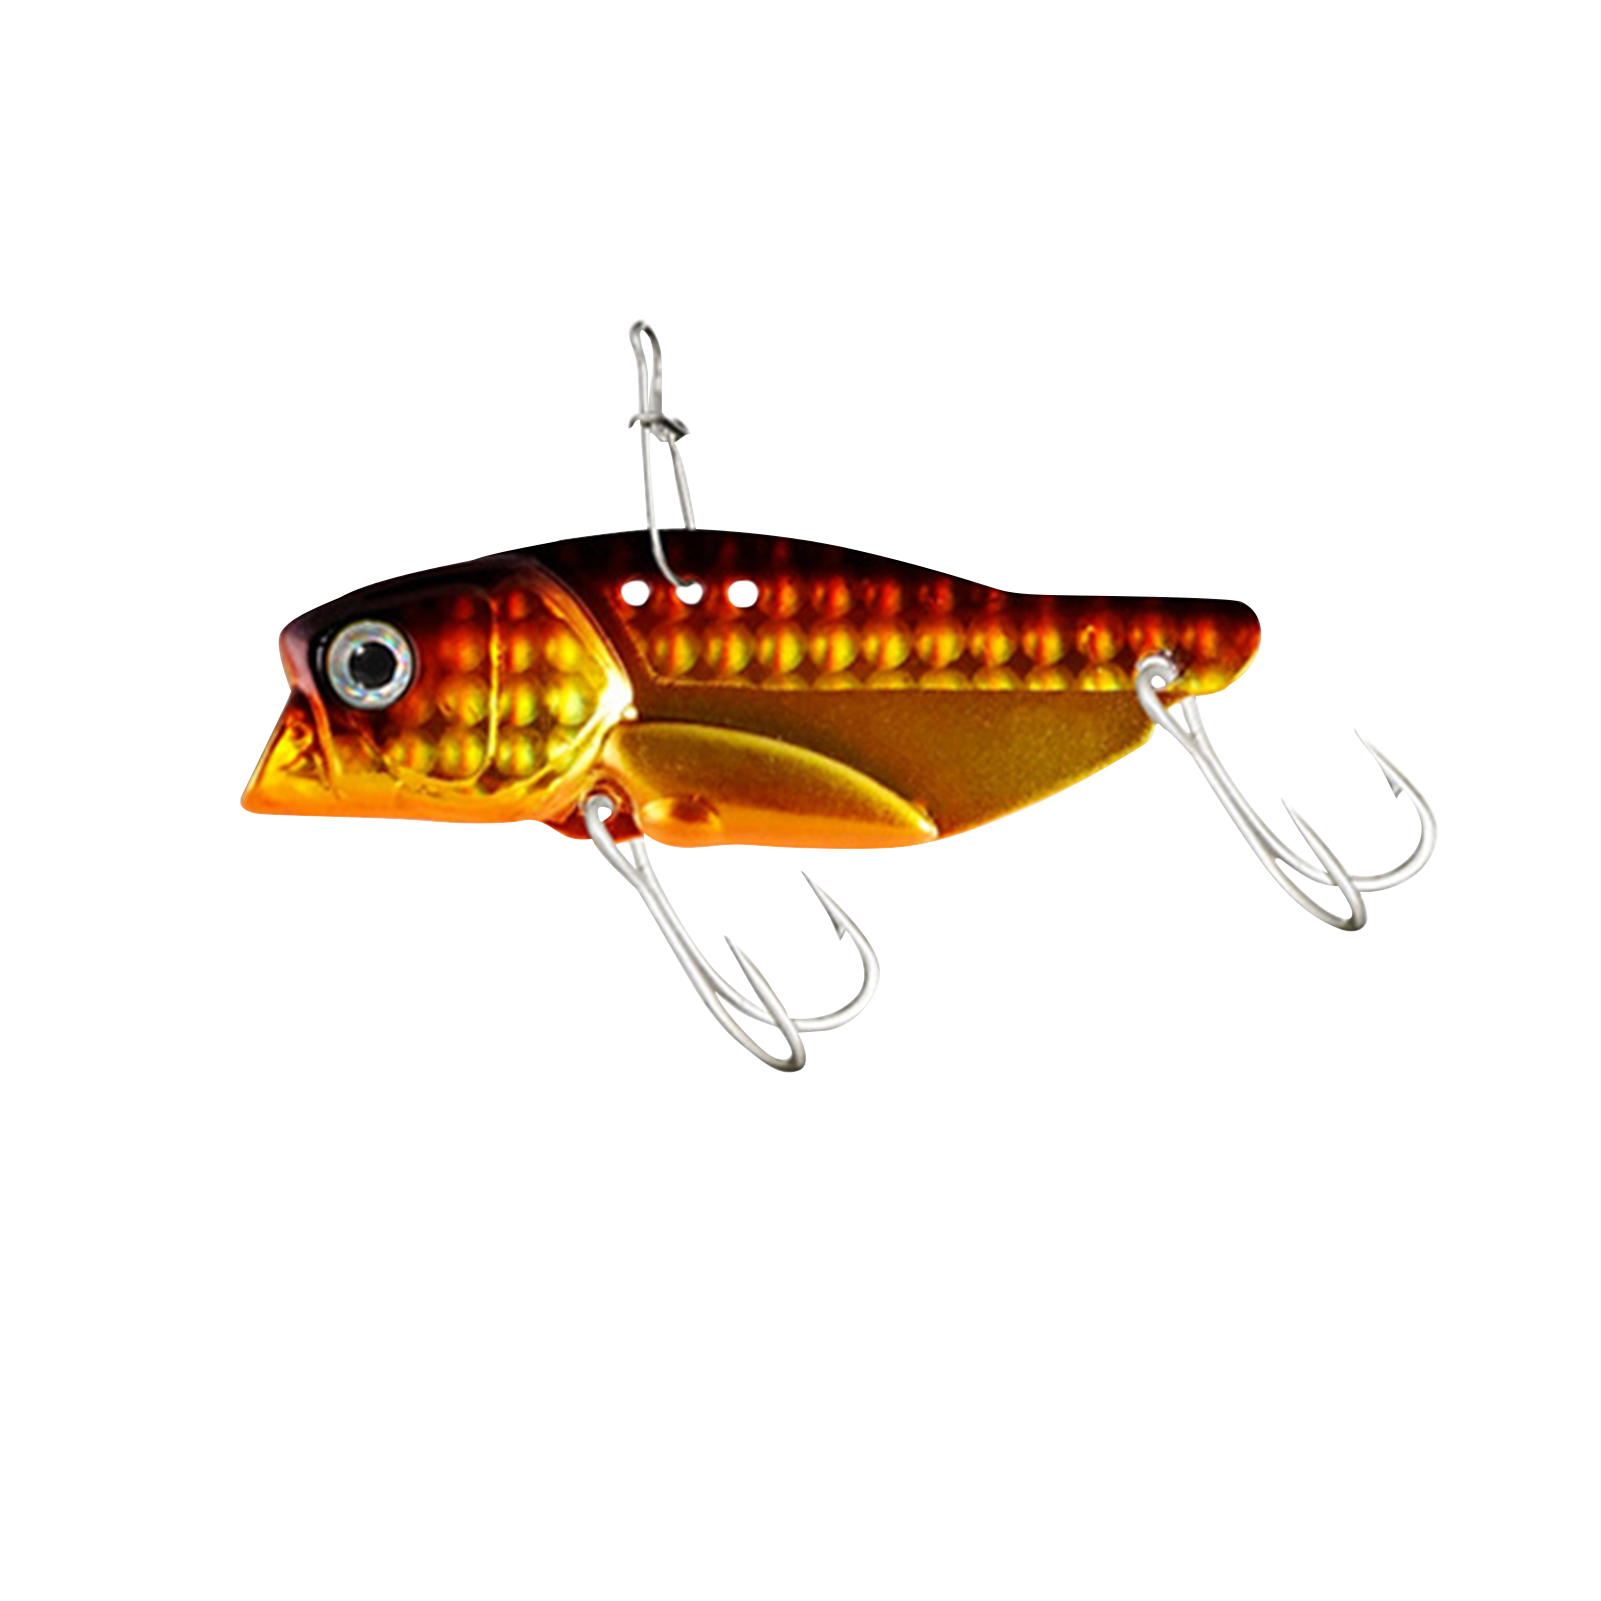 Realistic fish lure - Suitable for all kinds of fish（BUY 2 GET 1 FREE